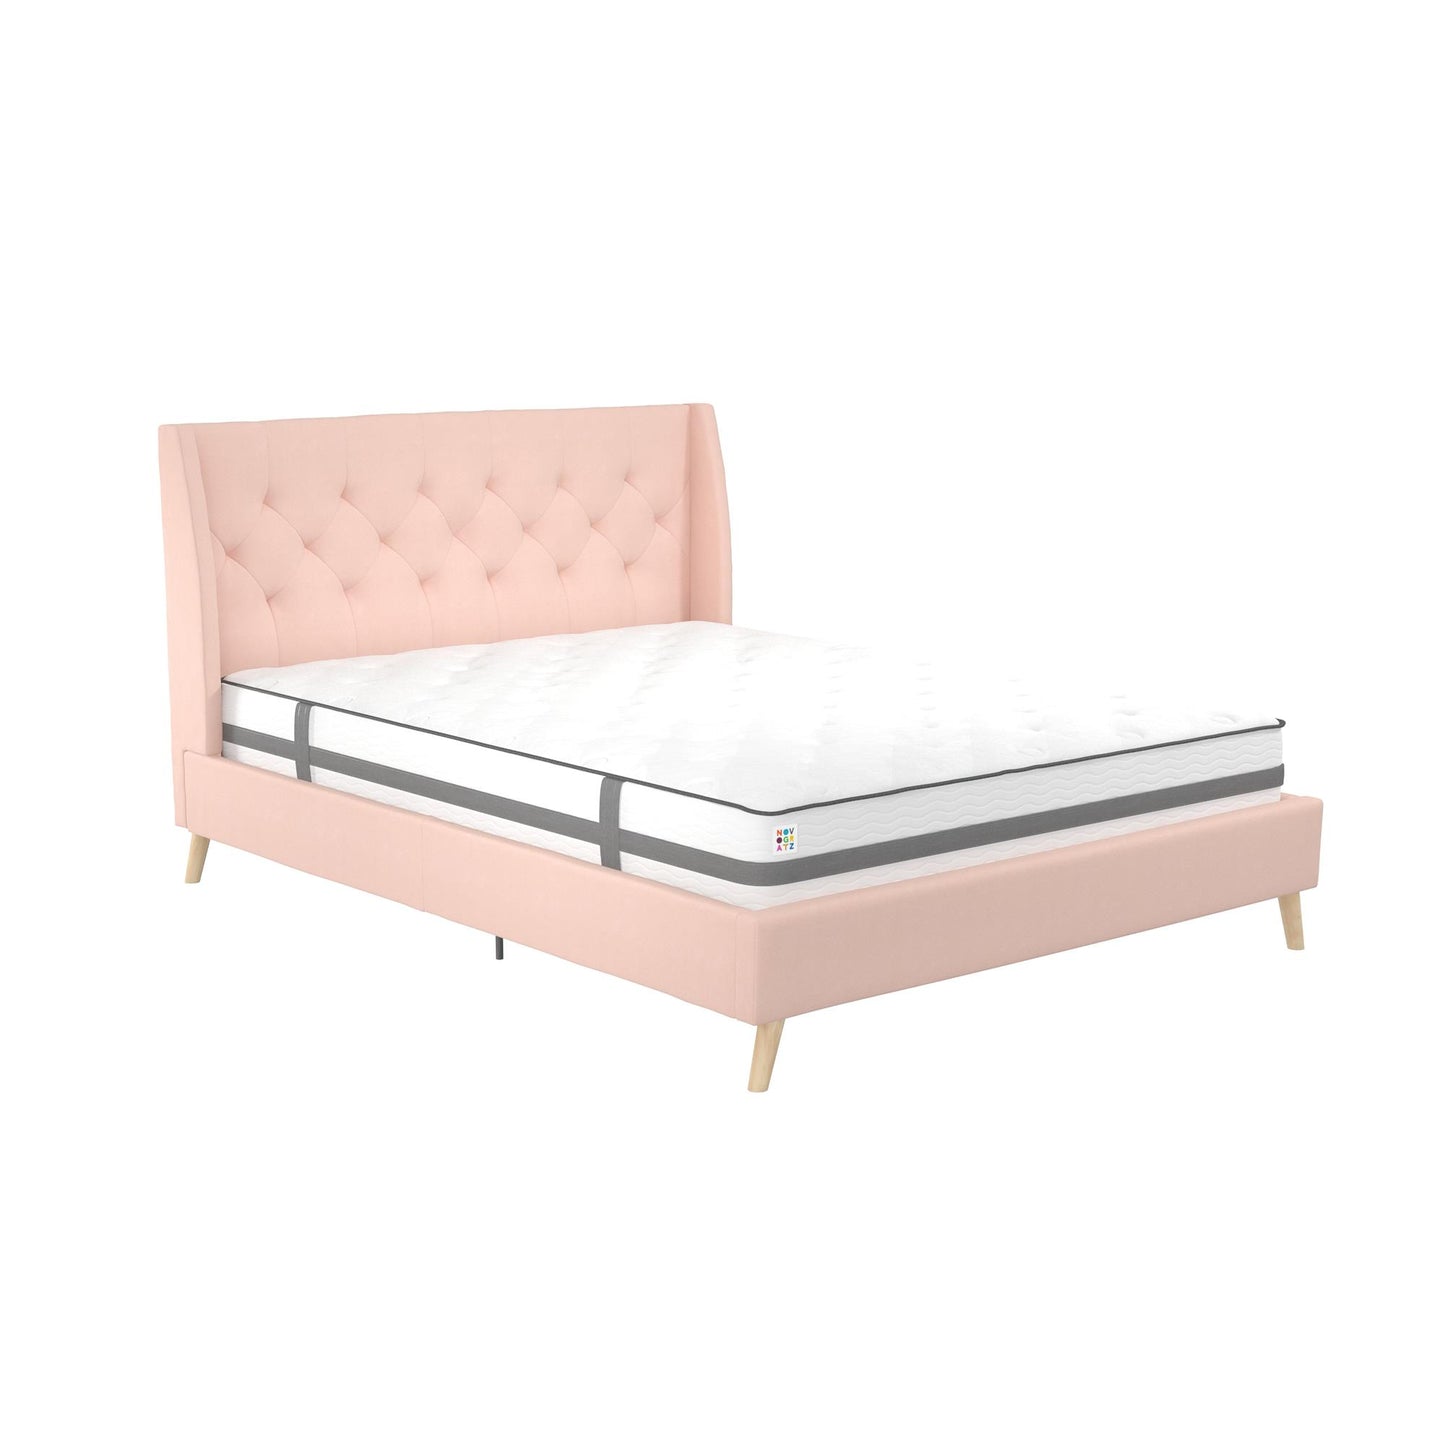 Her Majesty Bed - Pink - Queen